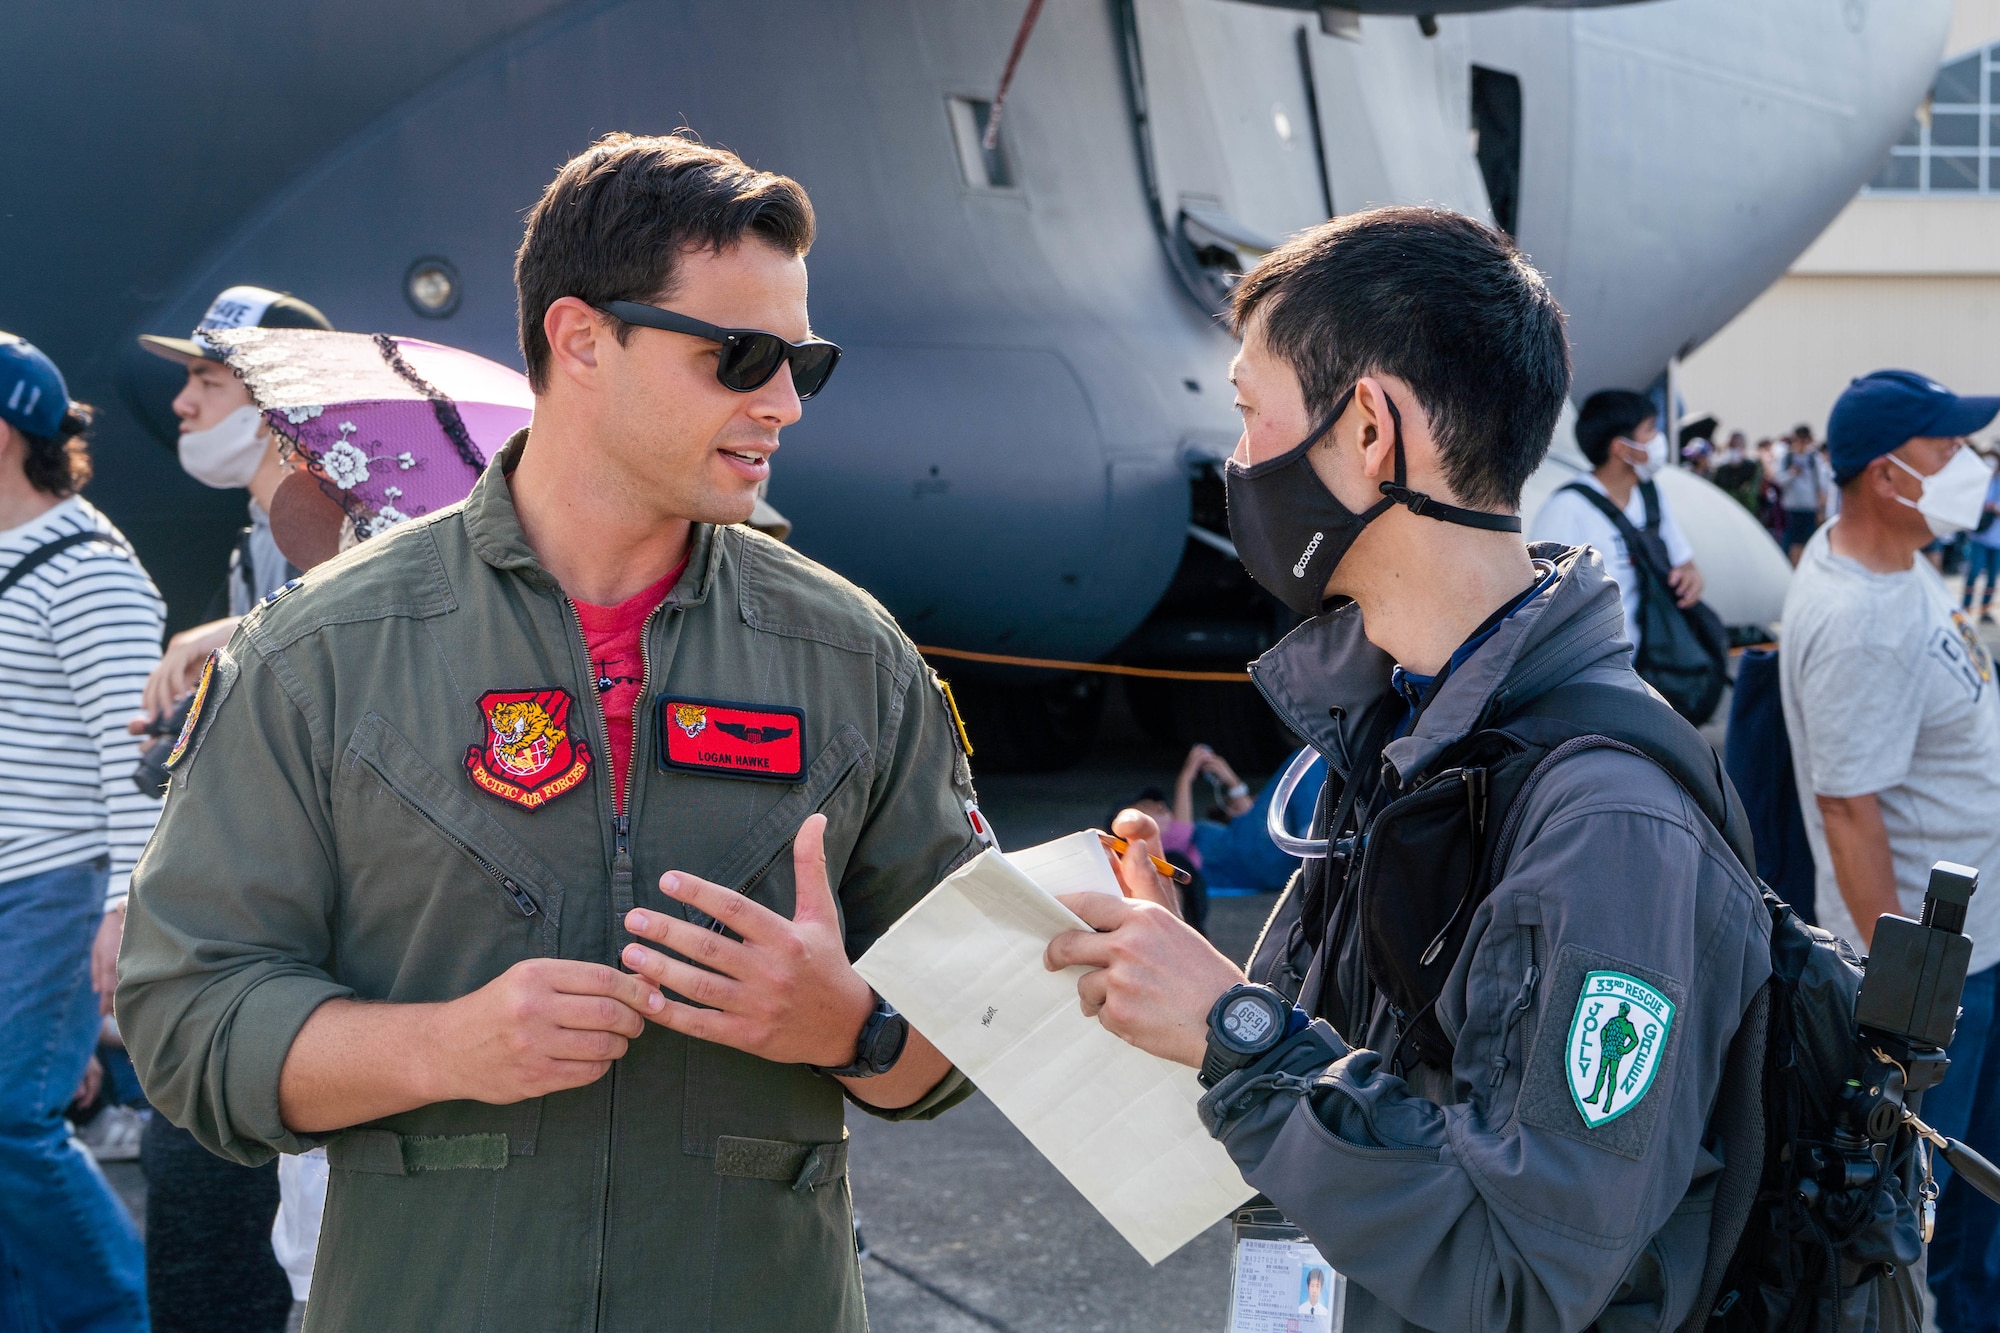 Capt. Logan Hawke, 535th Airlift Squadron pilot, interacts with guests at the Friendship Festival 2022 at Yokota Air Base, Japan, May 22, 2022. The festival was an opportunity to learn about and celebrate the enduring partnership between the U.S. and Japan. (U.S. Air Force photo by Airman 1st Class Makensie Cooper)